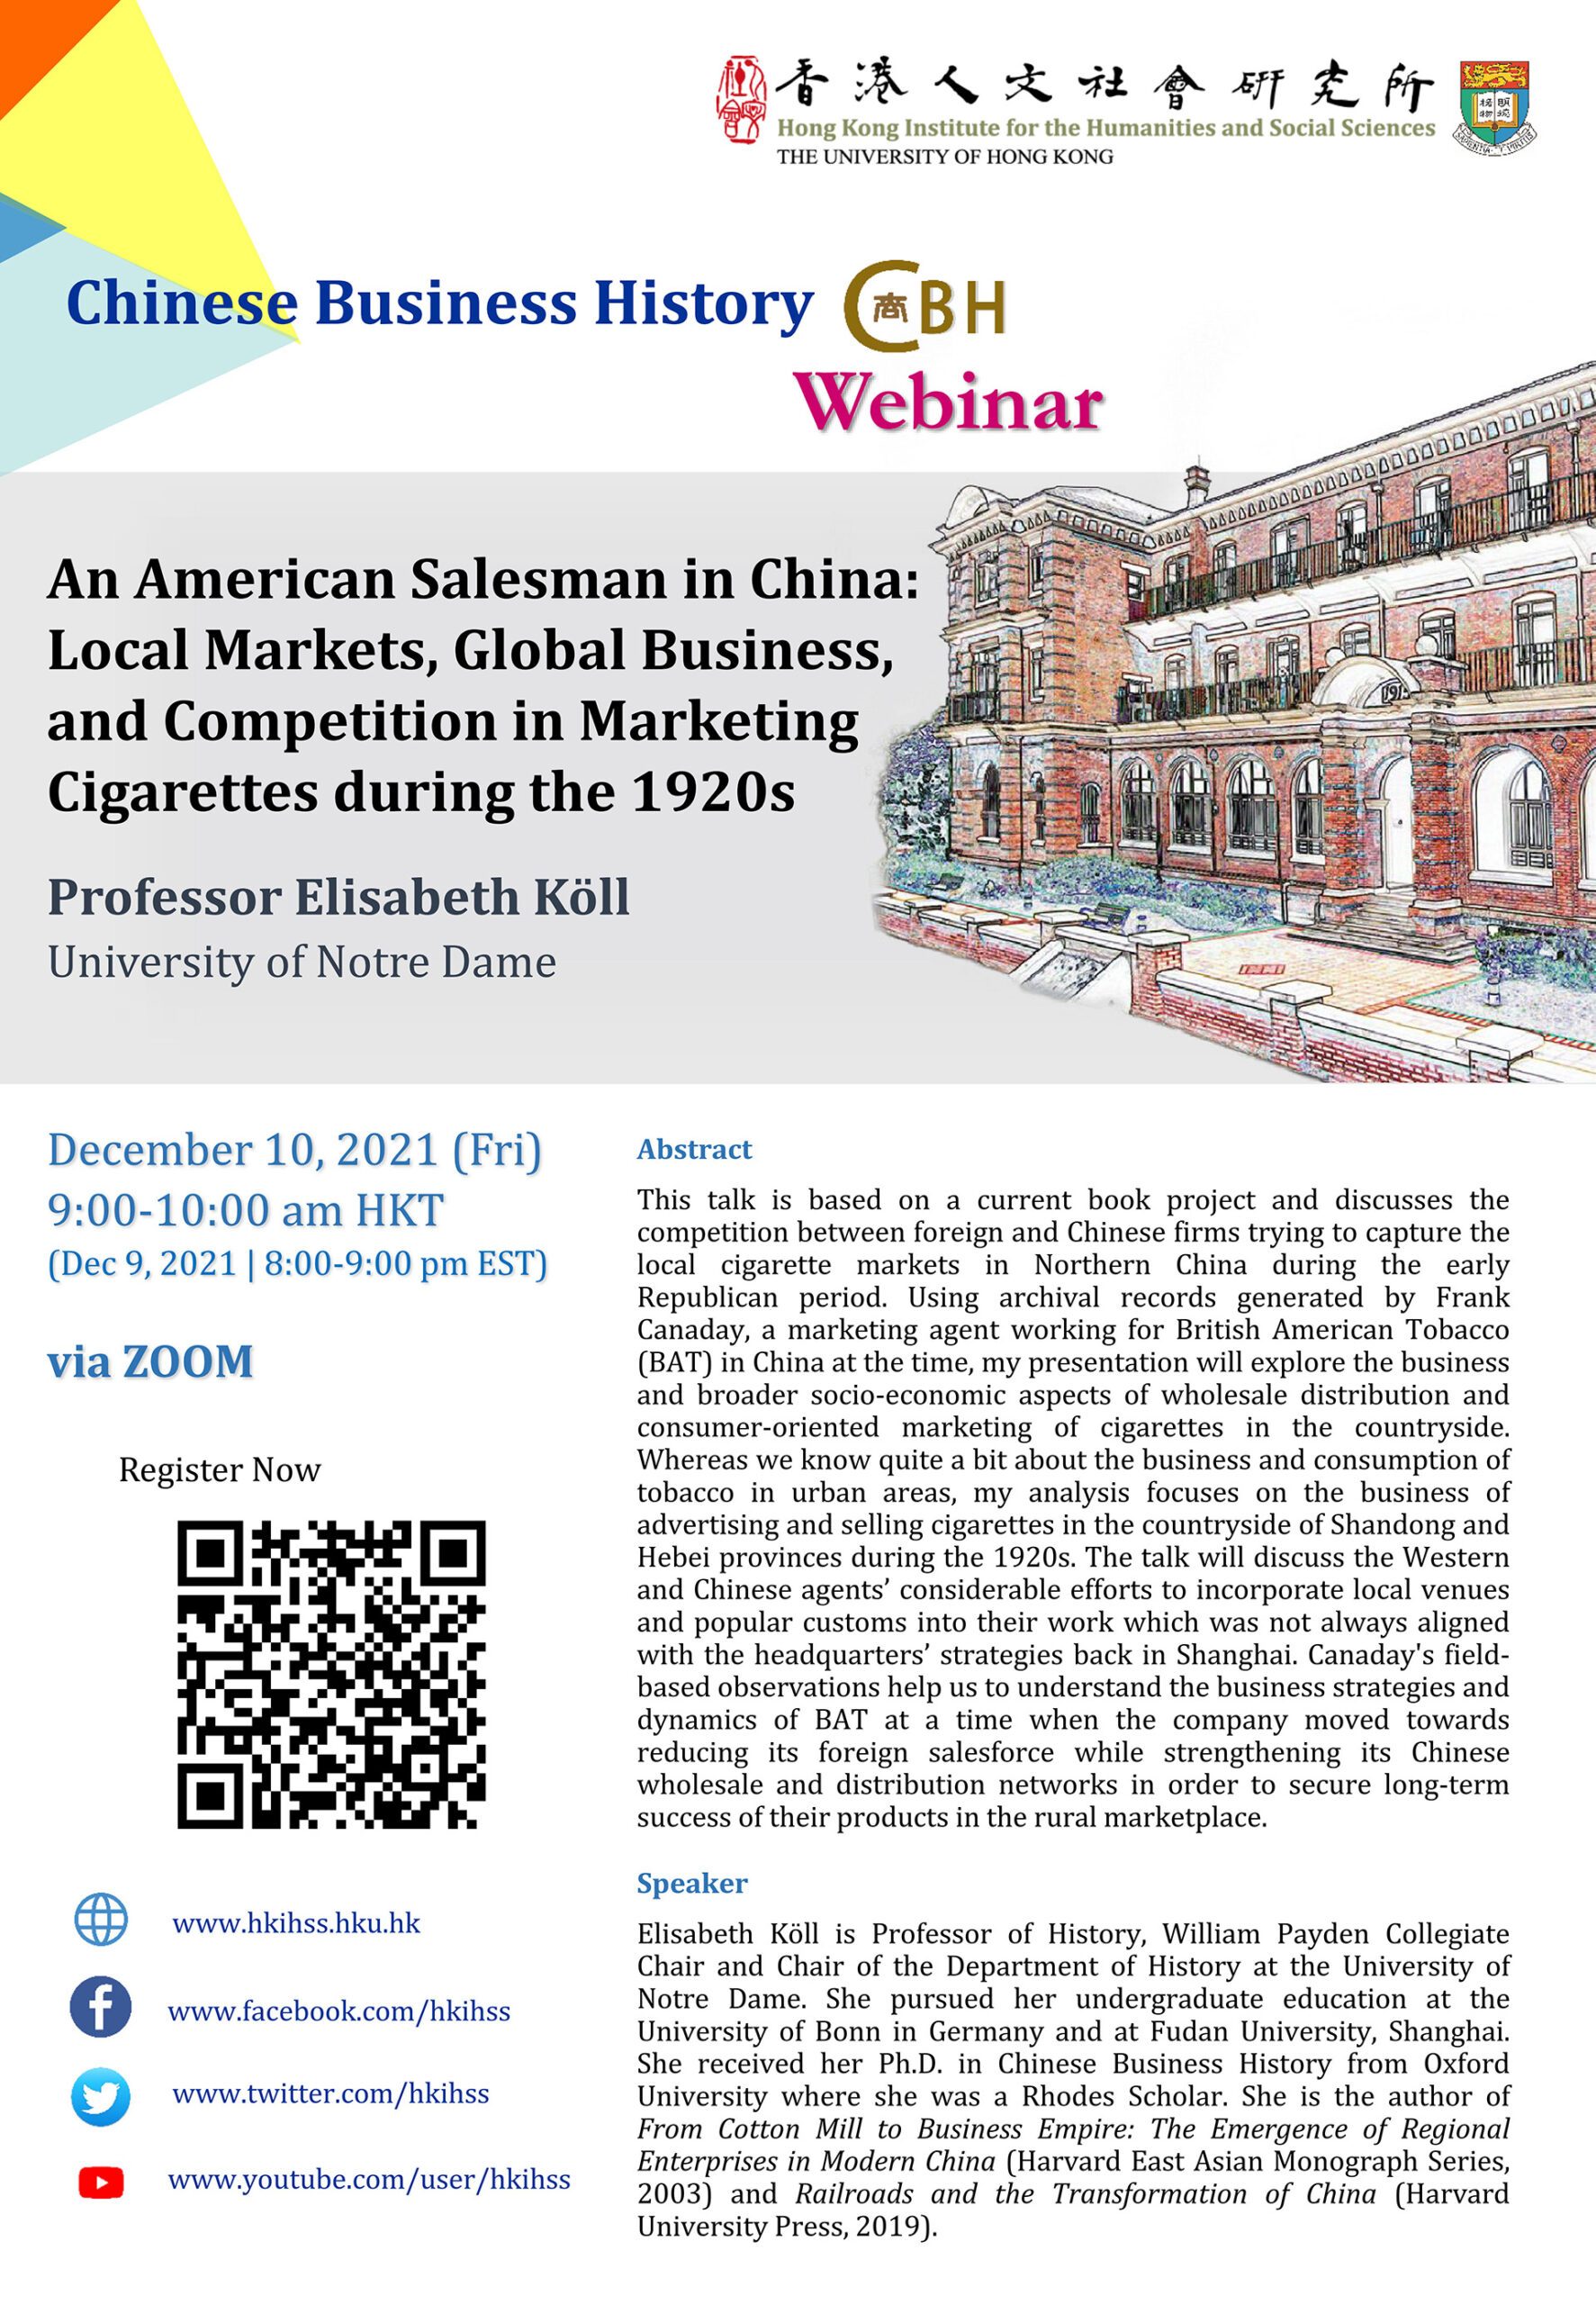 Chinese Business History Webinar on “An American Salesman in China: Local Markets, Global Business, and Competition in Marketing Cigarettes during the 1920s” by Professor Elisabeth Köll (December 10, 2021)